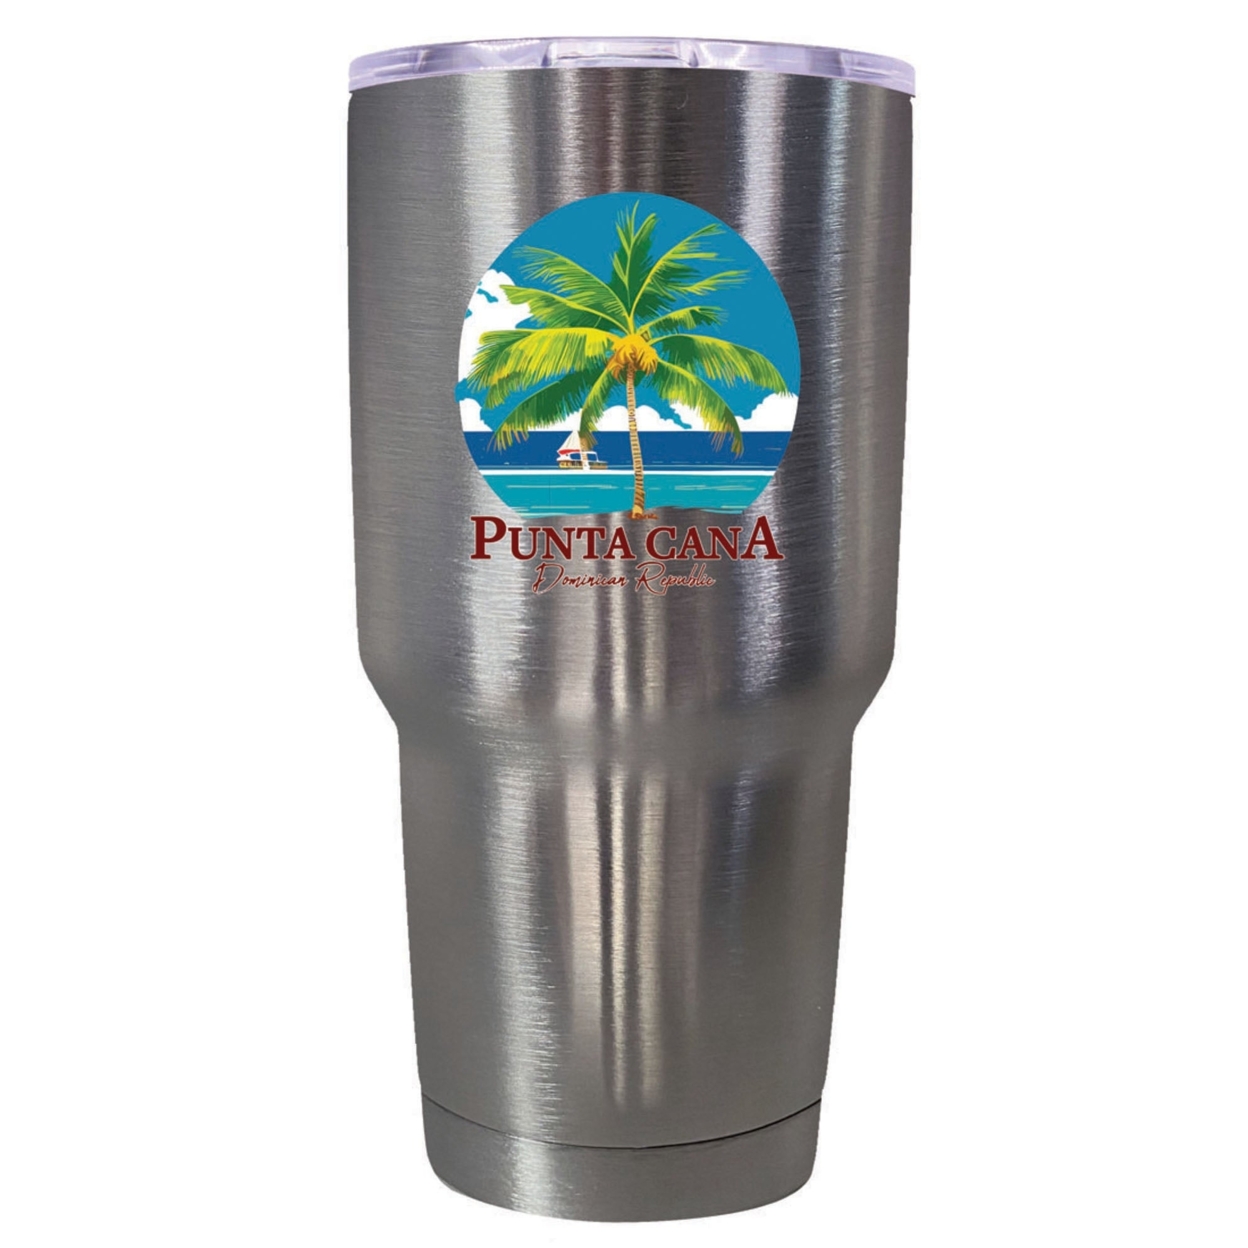 Punta Cana Dominican Republic Souvenir 24 Oz Insulated Stainless Steel Tumbler - Black, PARROT B